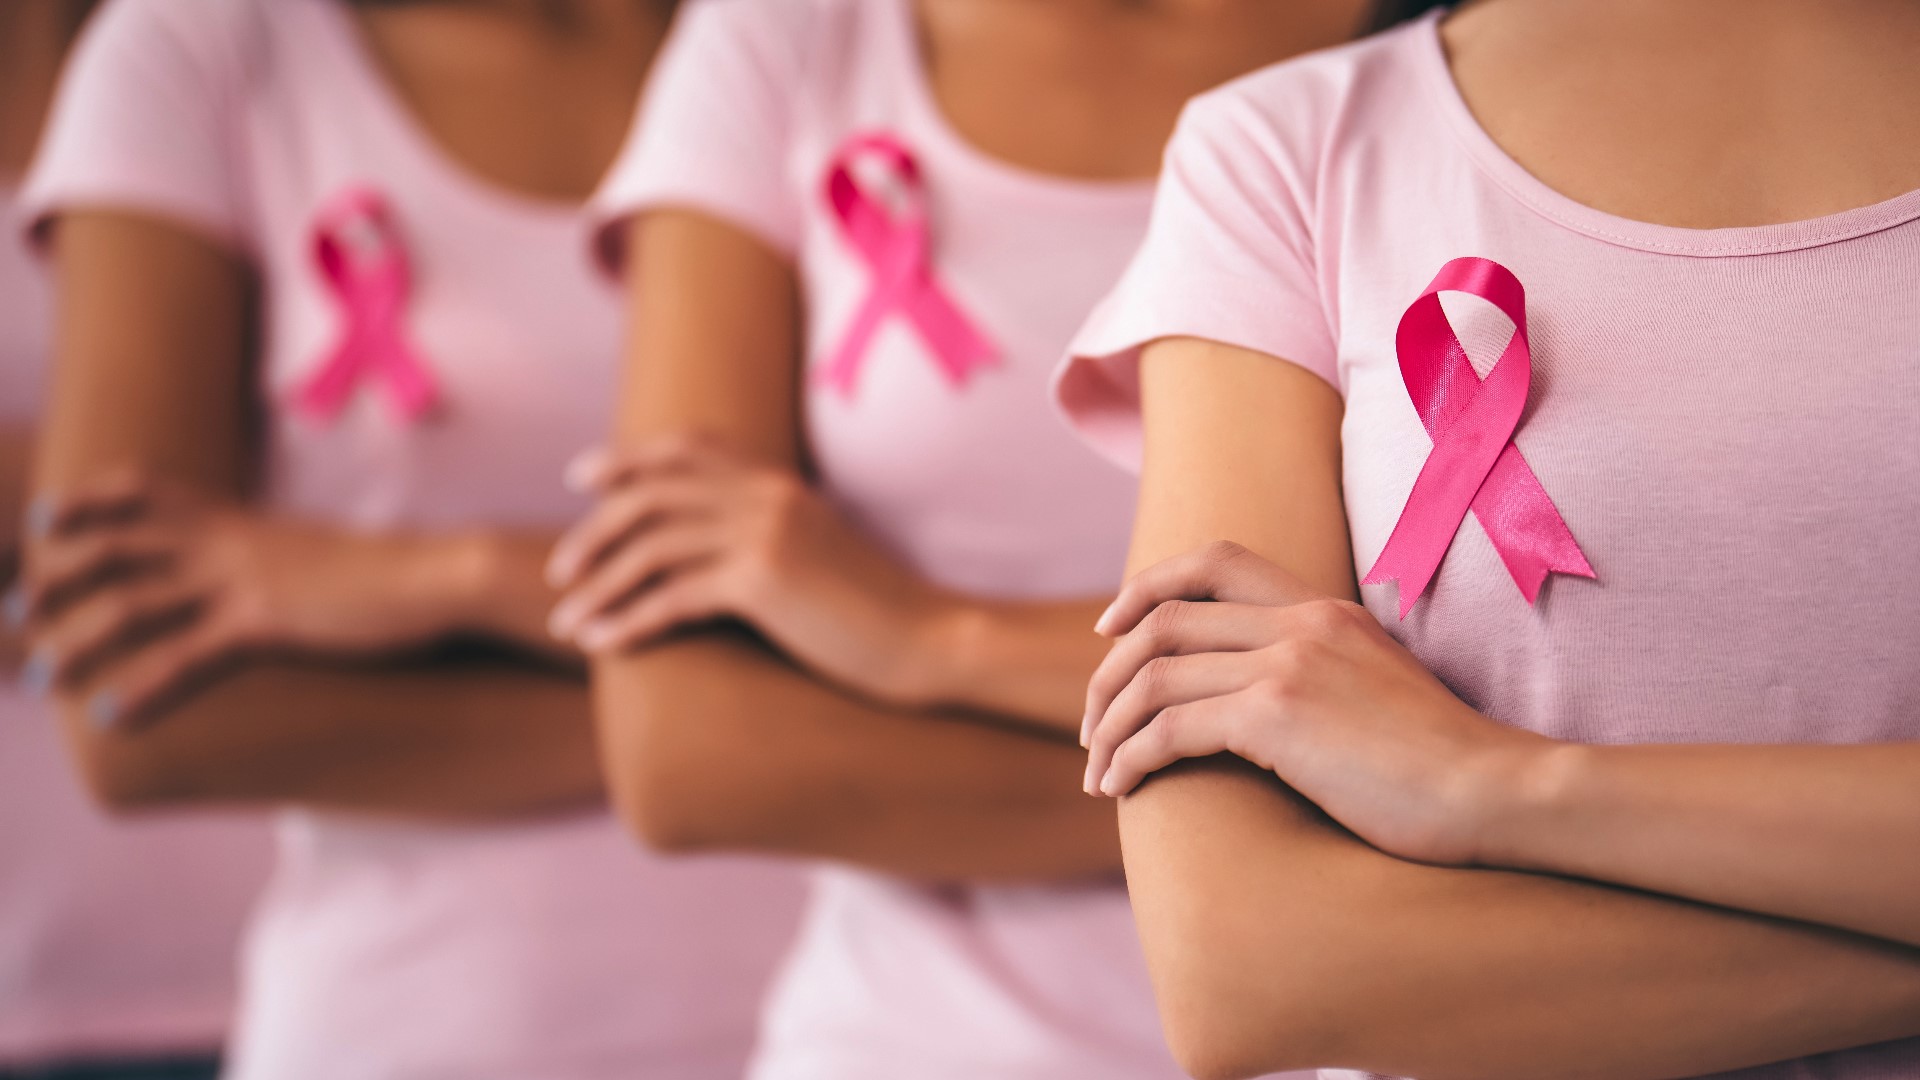 Breast cancer is the second-leading cause of death for women, despite being preventable in most cases.